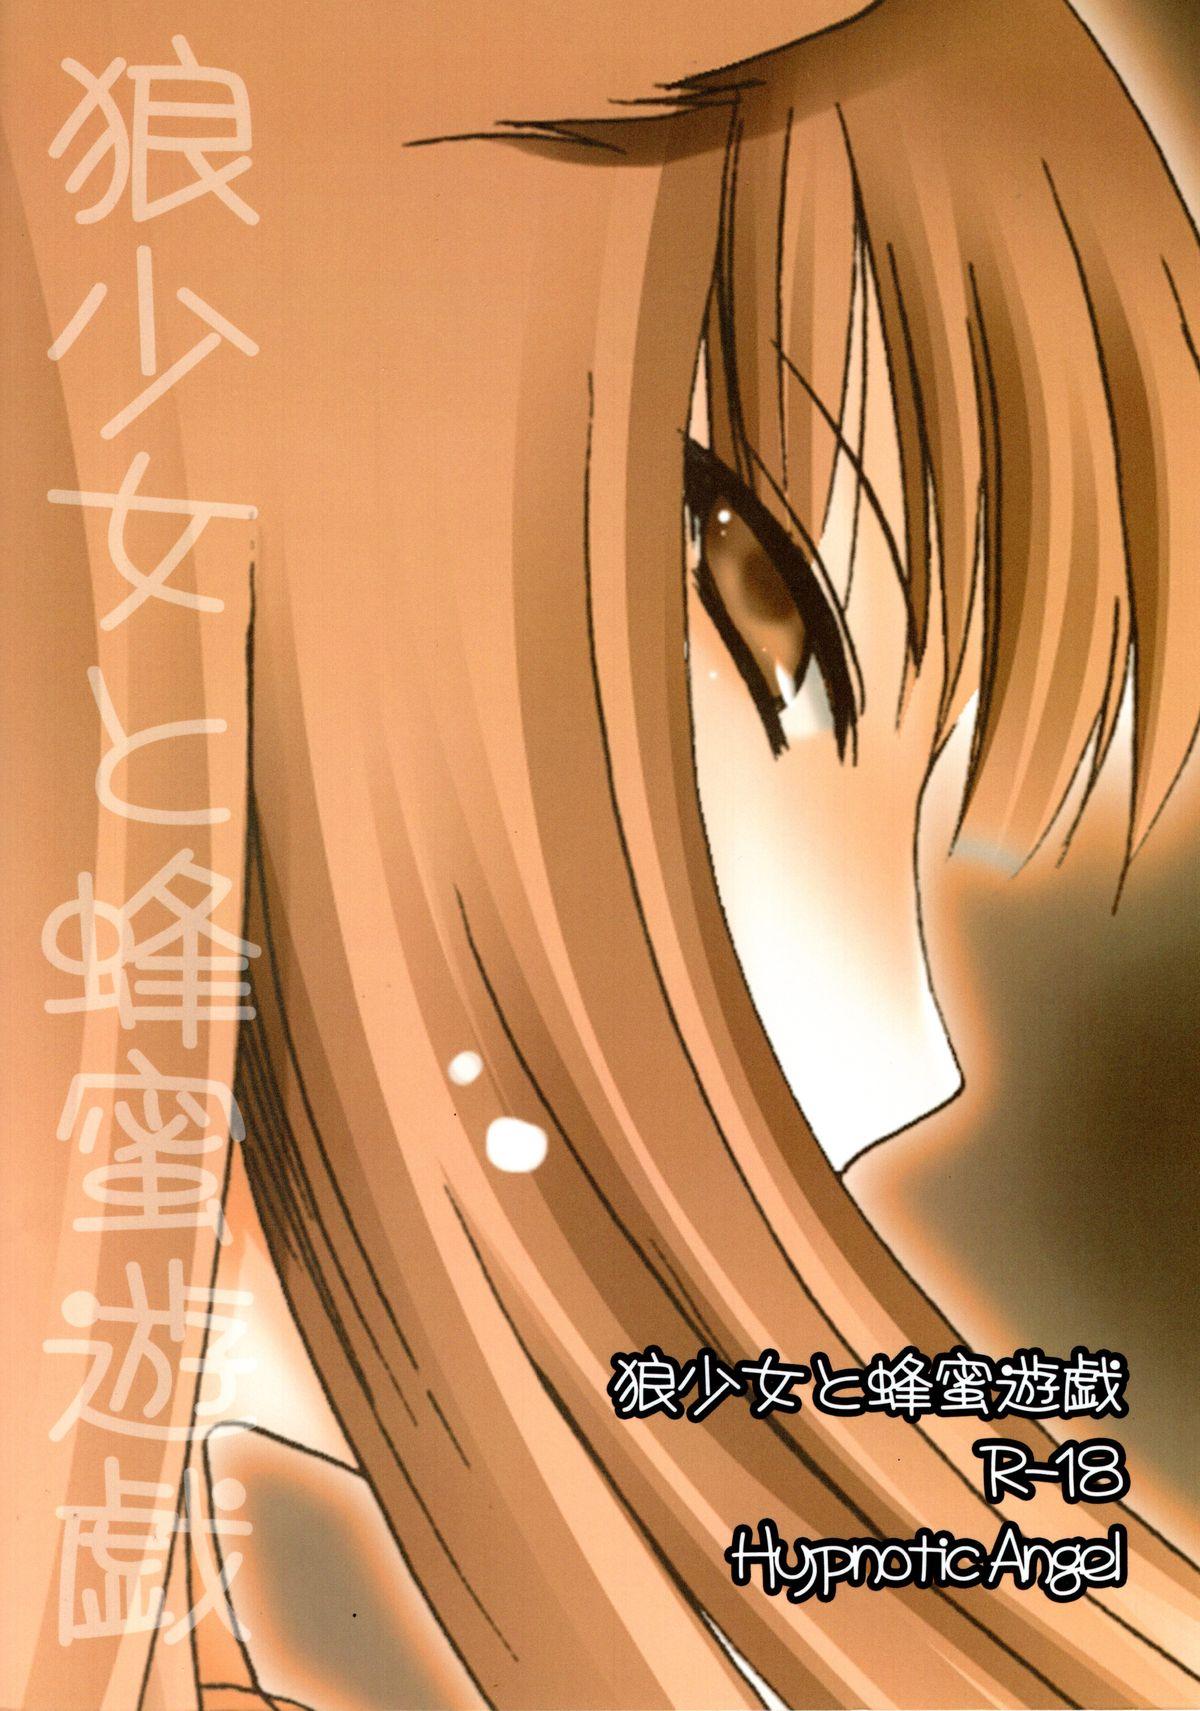 Crazy Ookami Shoujo to Hachimitsu Yuugi - Spice and wolf Fishnet - Page 2